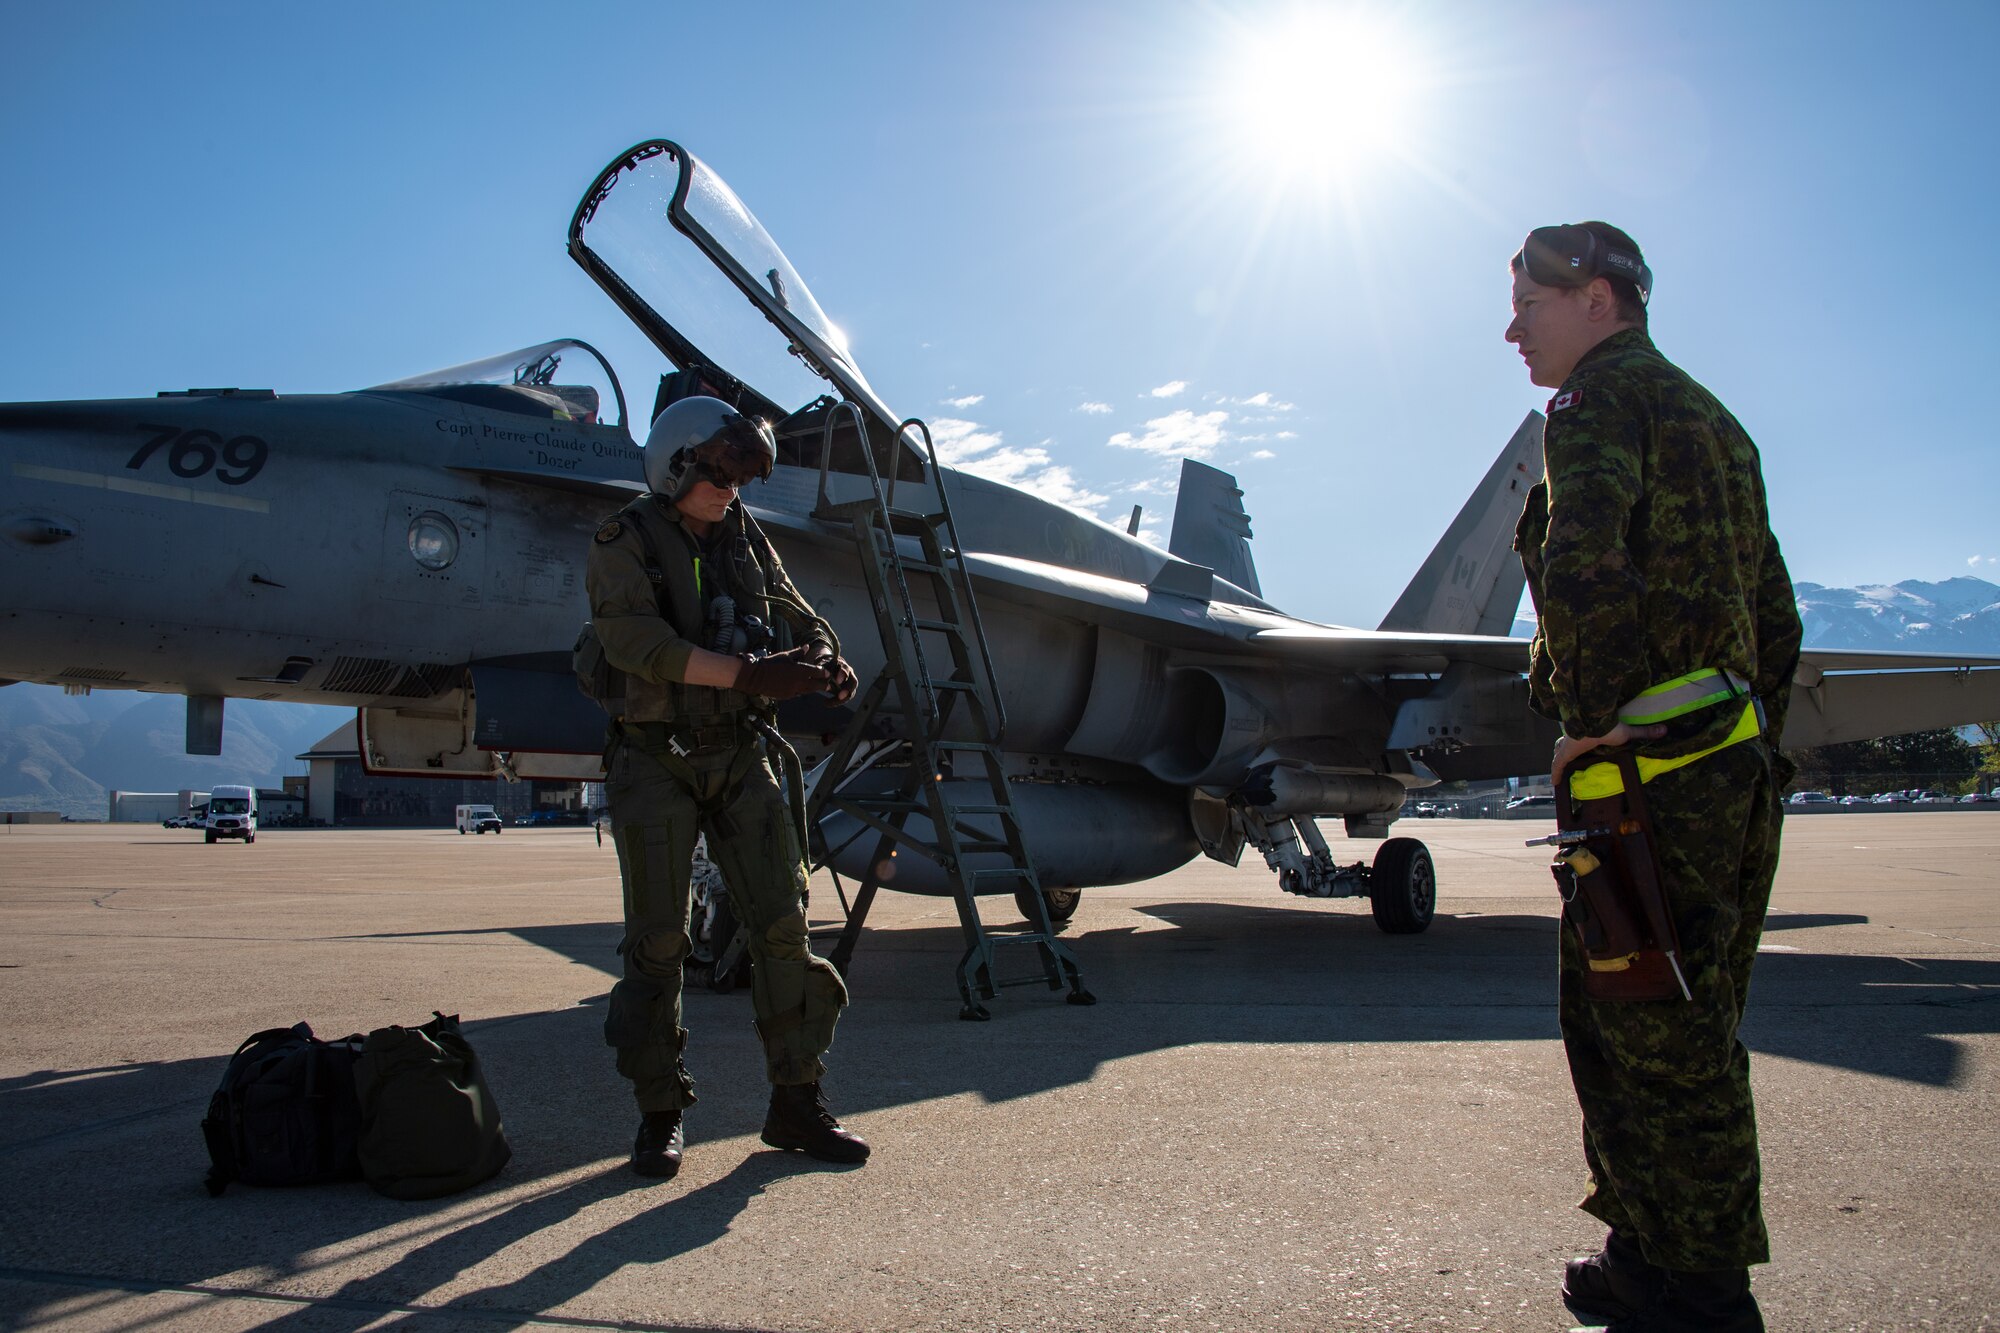 Royal Canadian Air Force pilot Capt. Jason Berndt and structural technician Cpl. Matthew Roy, assigned to the 433rd Tactical Fighter Squadron, perform pre-flight checks May 3, 2018, at Hill Air Force Base, Utah. The Canadian unit participated in a Weapons Evaluation Systems Program, or WSEP, exercise conducted by the 86th Fighter Weapons Squadron, a Hill tenant unit. (U.S. Air Force photo by R. Nial Bradshaw)